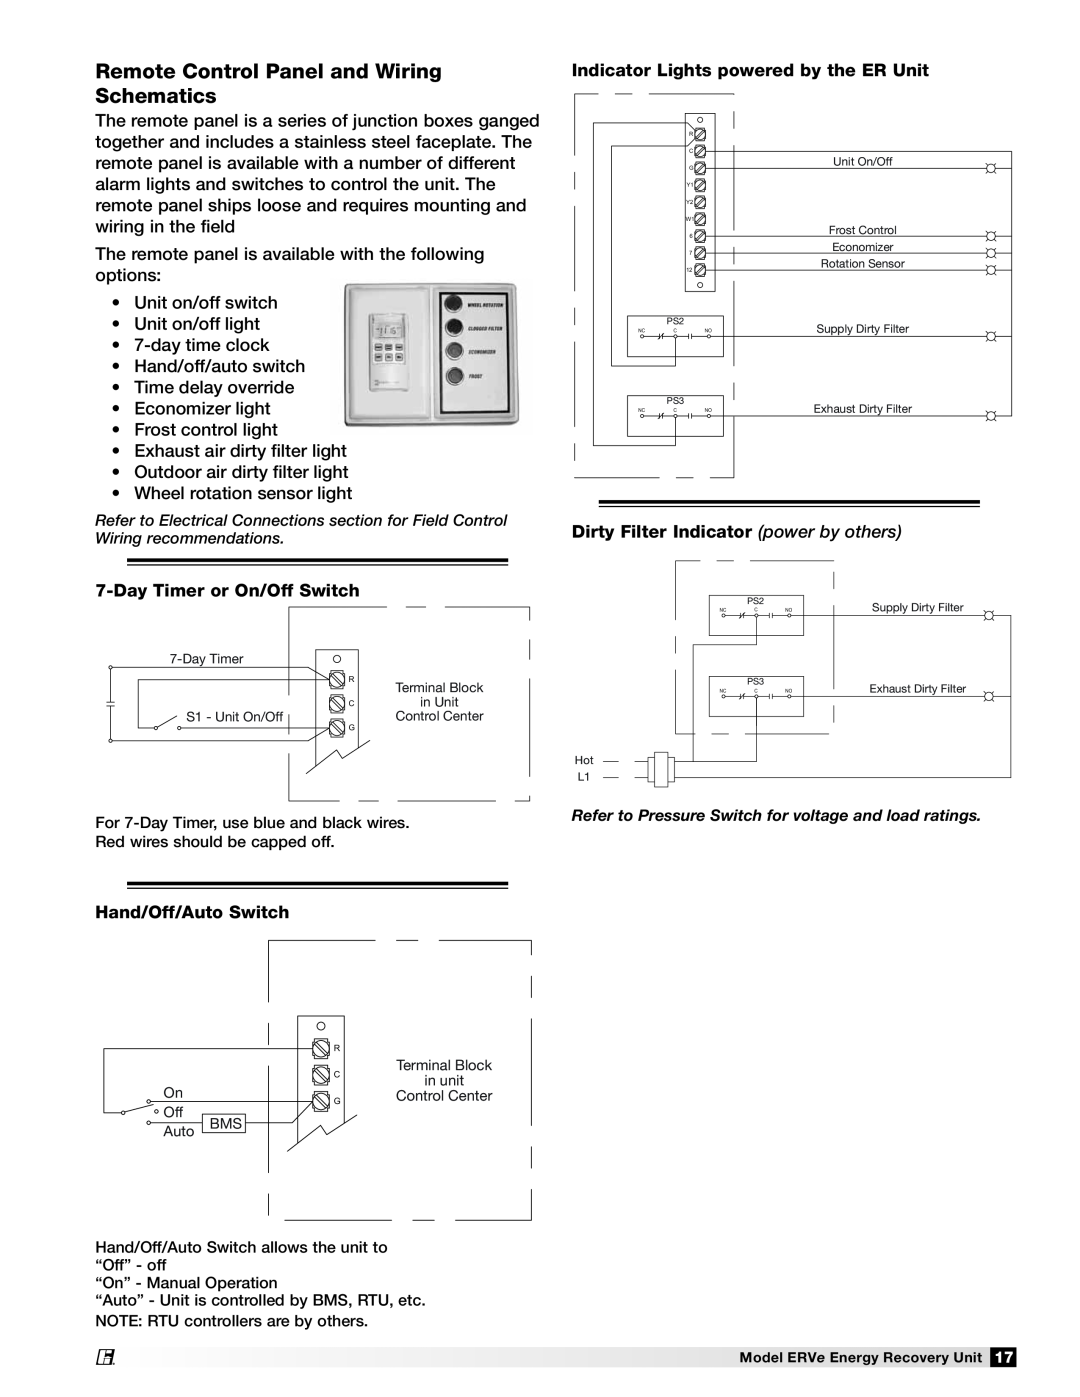 Greenheck Fan ERVe manual Remote Control Panel and Wiring Schematics, Indicator Lights powered by the ER Unit 